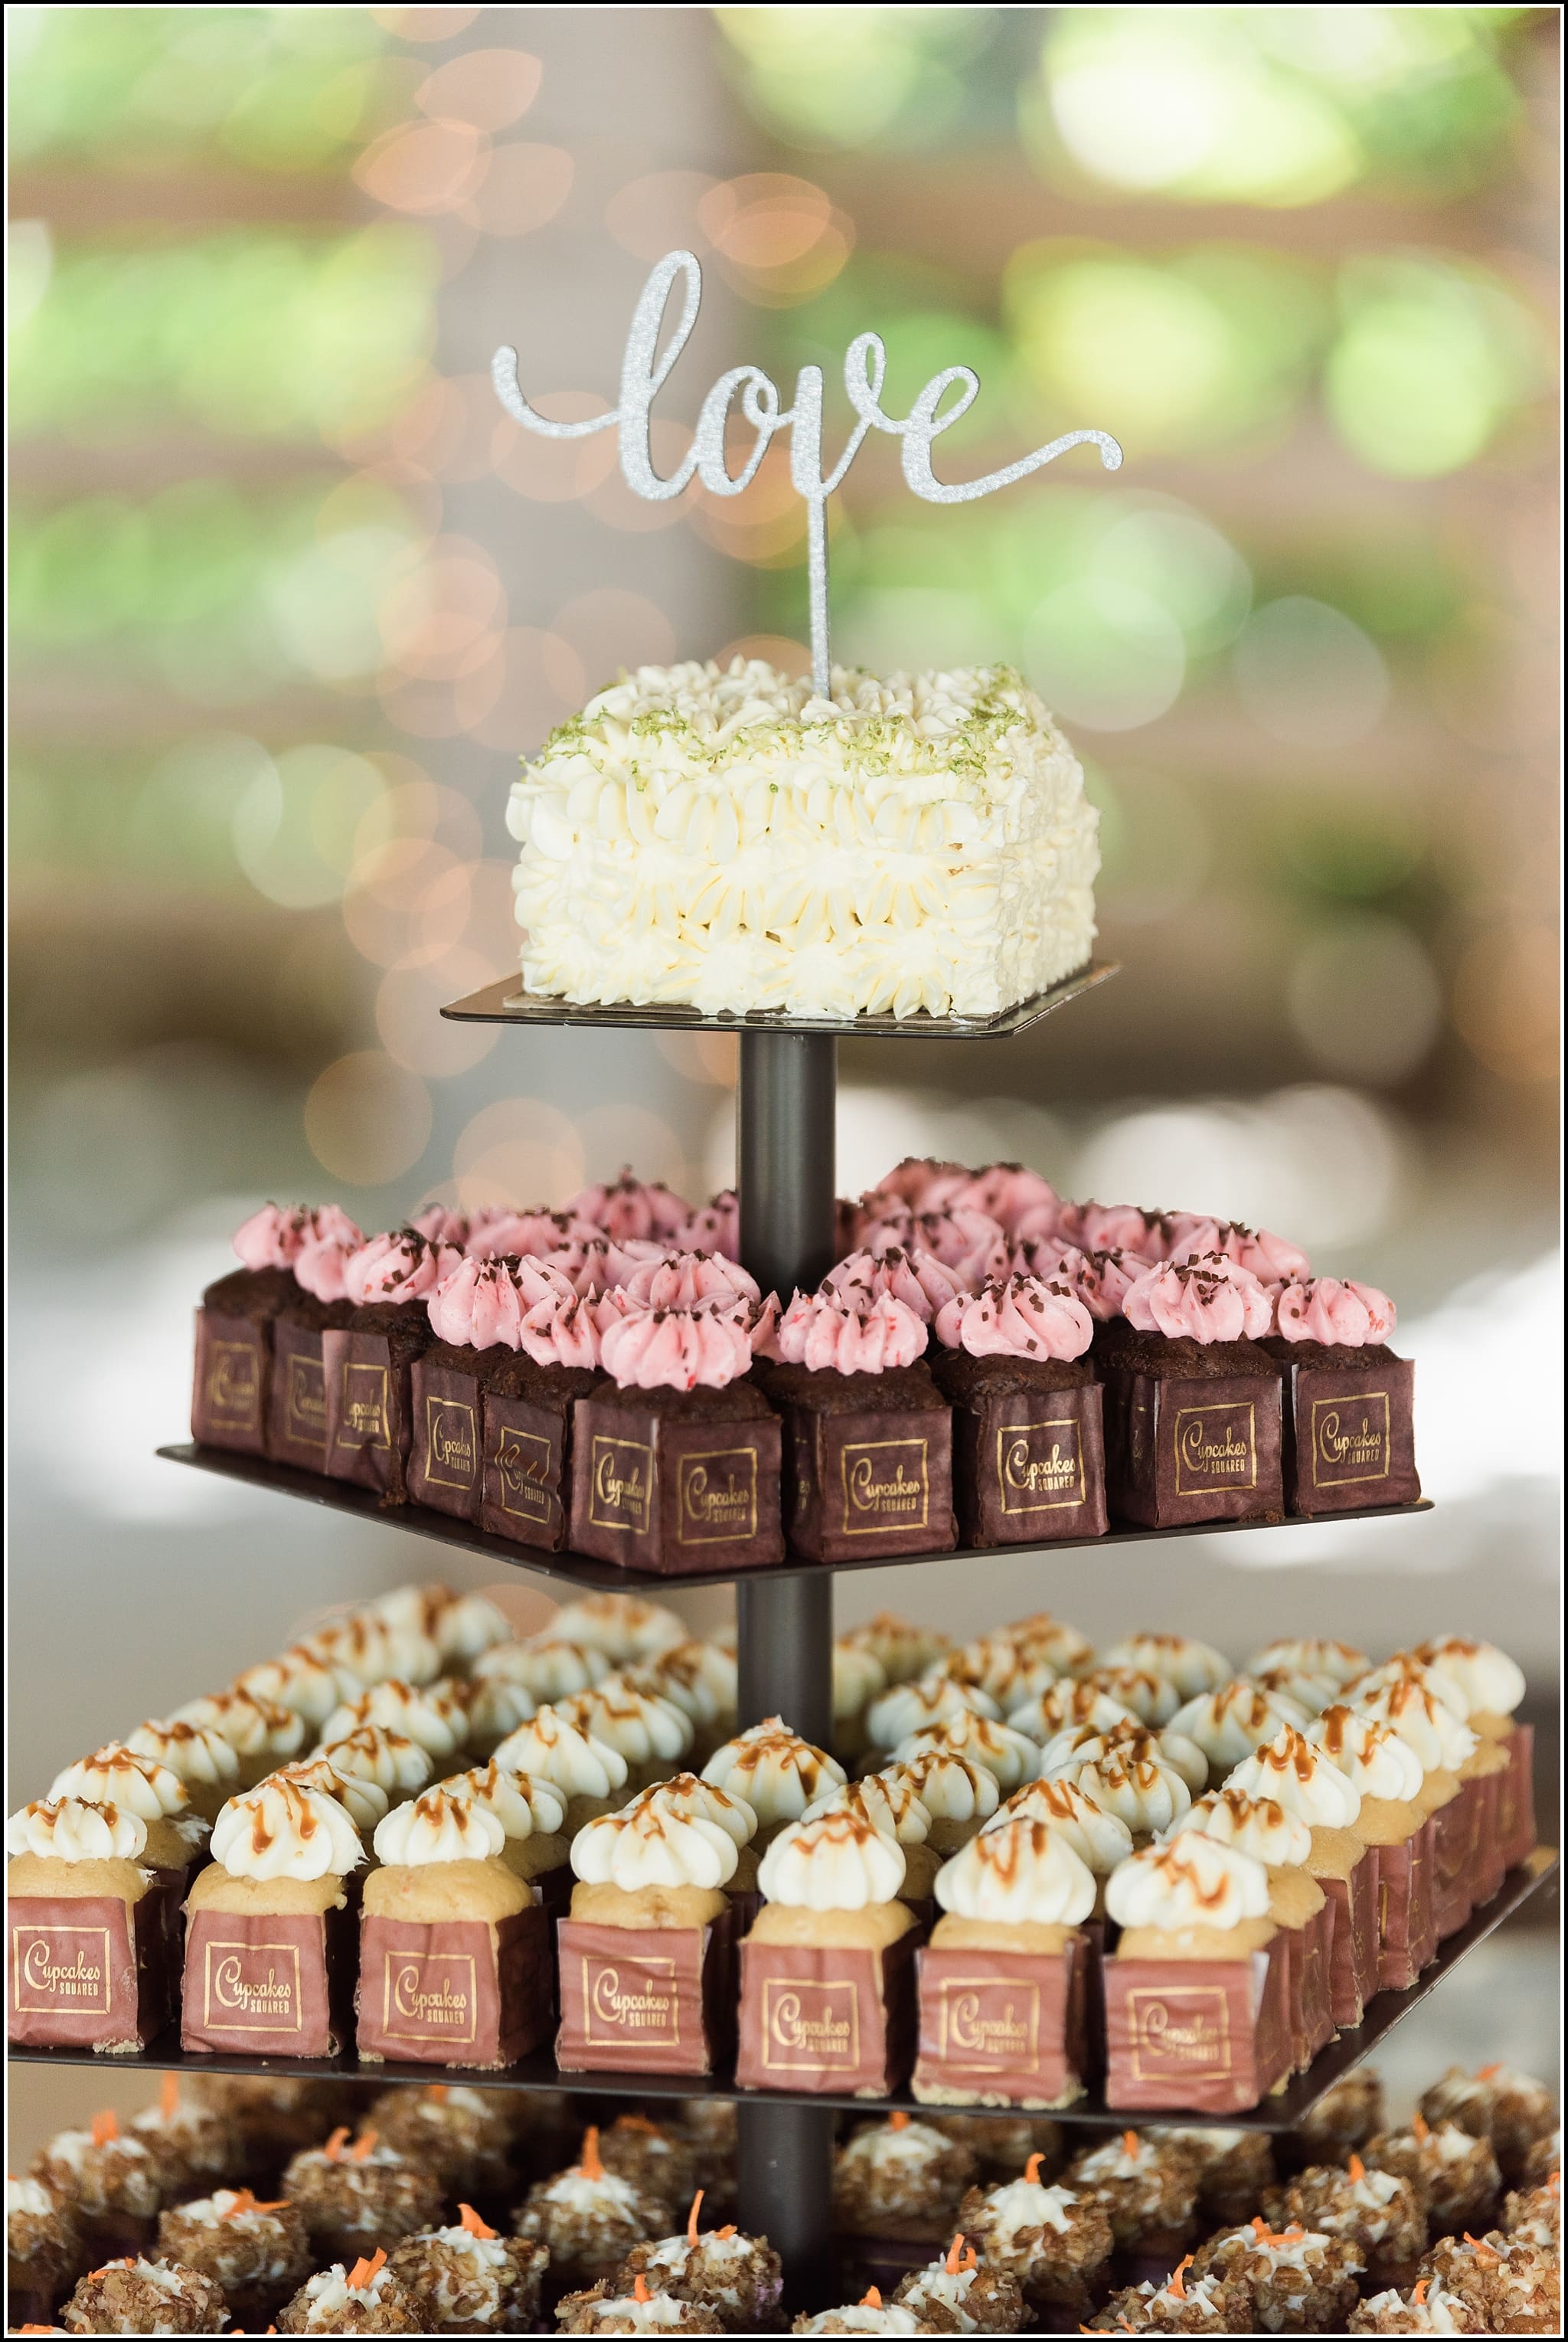  favorite wedding images 2016, wedding photos from 2016, our favorite wedding photos, cupcake wedding tower